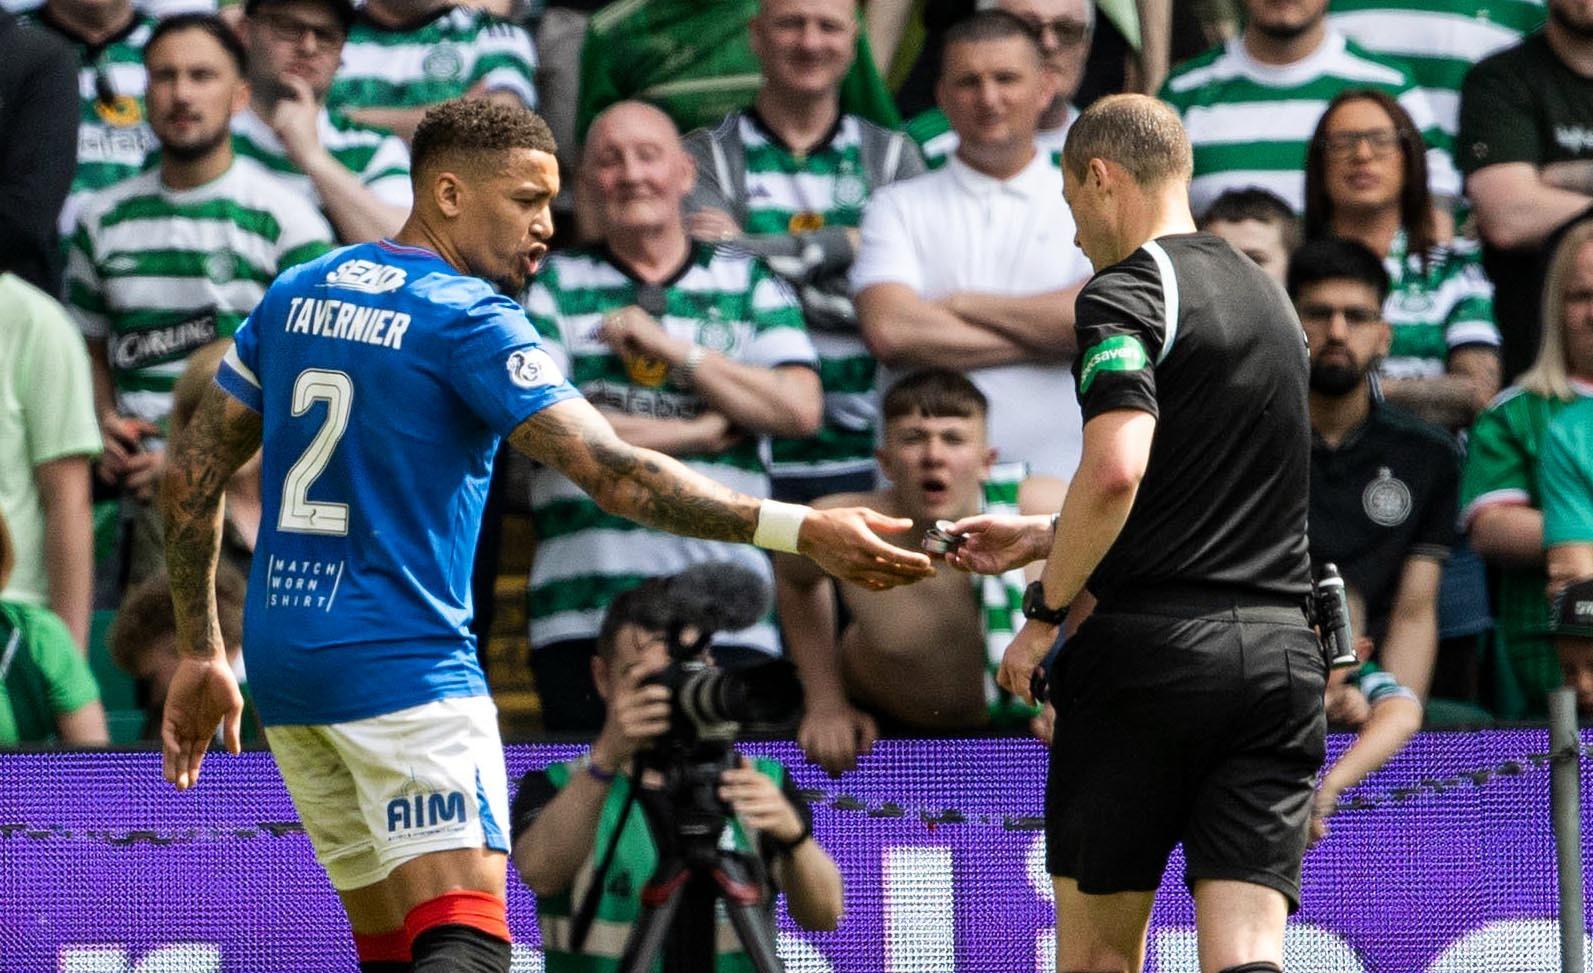 Rangers' James Tavernier hands referee Willie Collum an object that was thrown onto the pitch during a cinch Premiership match between Celtic and Rangers at Celtic Park.